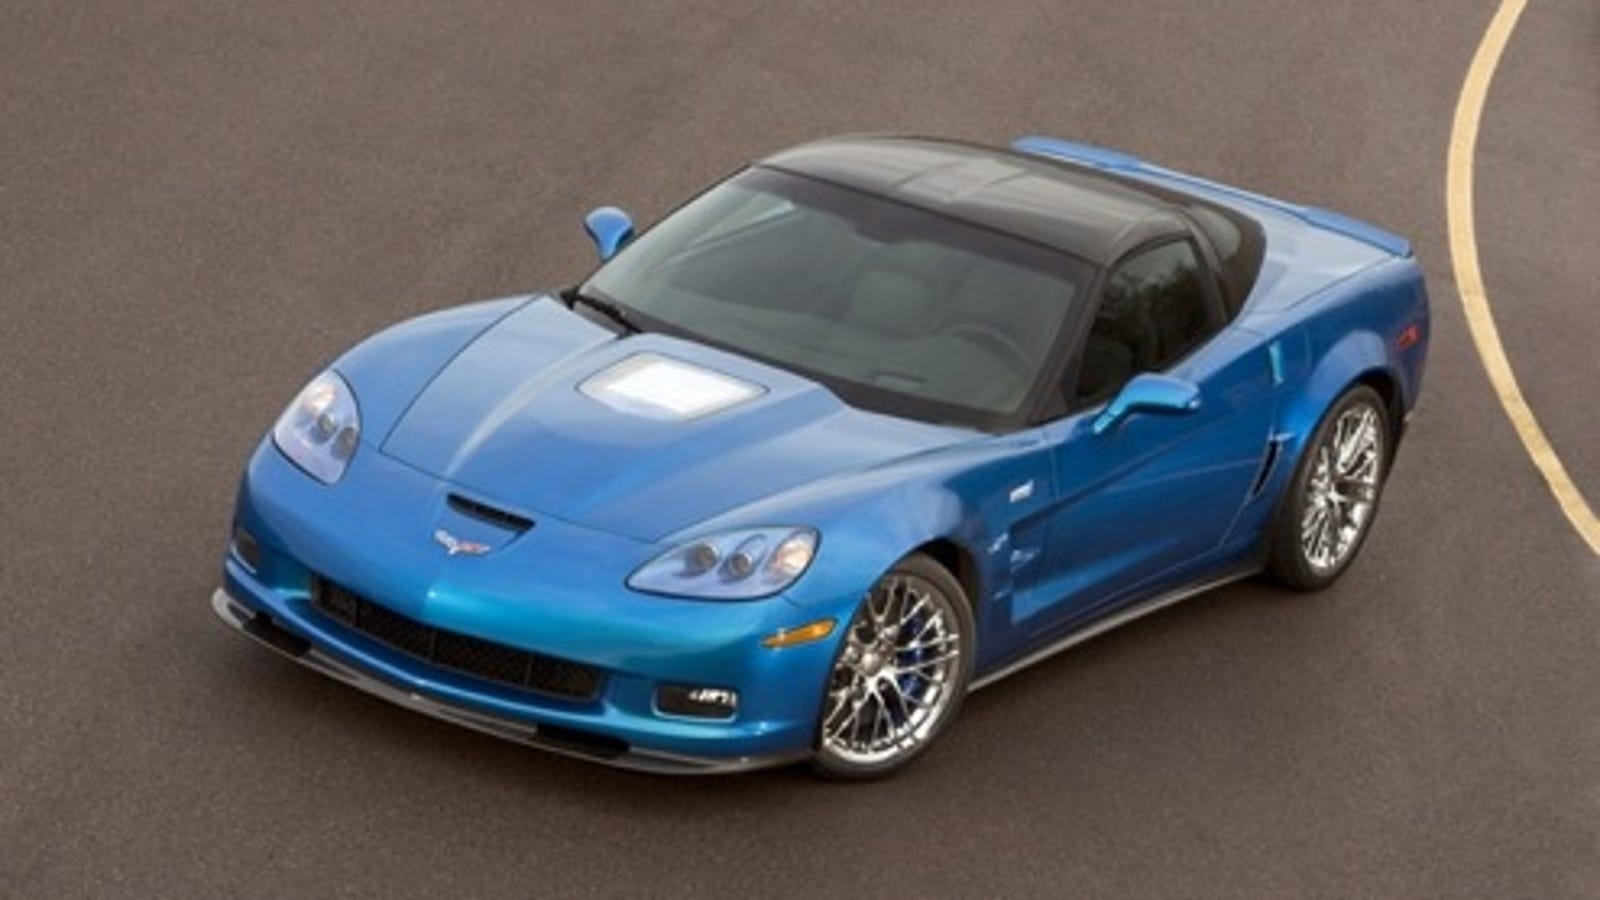 2009 Corvette ZR1 Power Numbers Finalized: LS9 V8 Hits 638 HP!